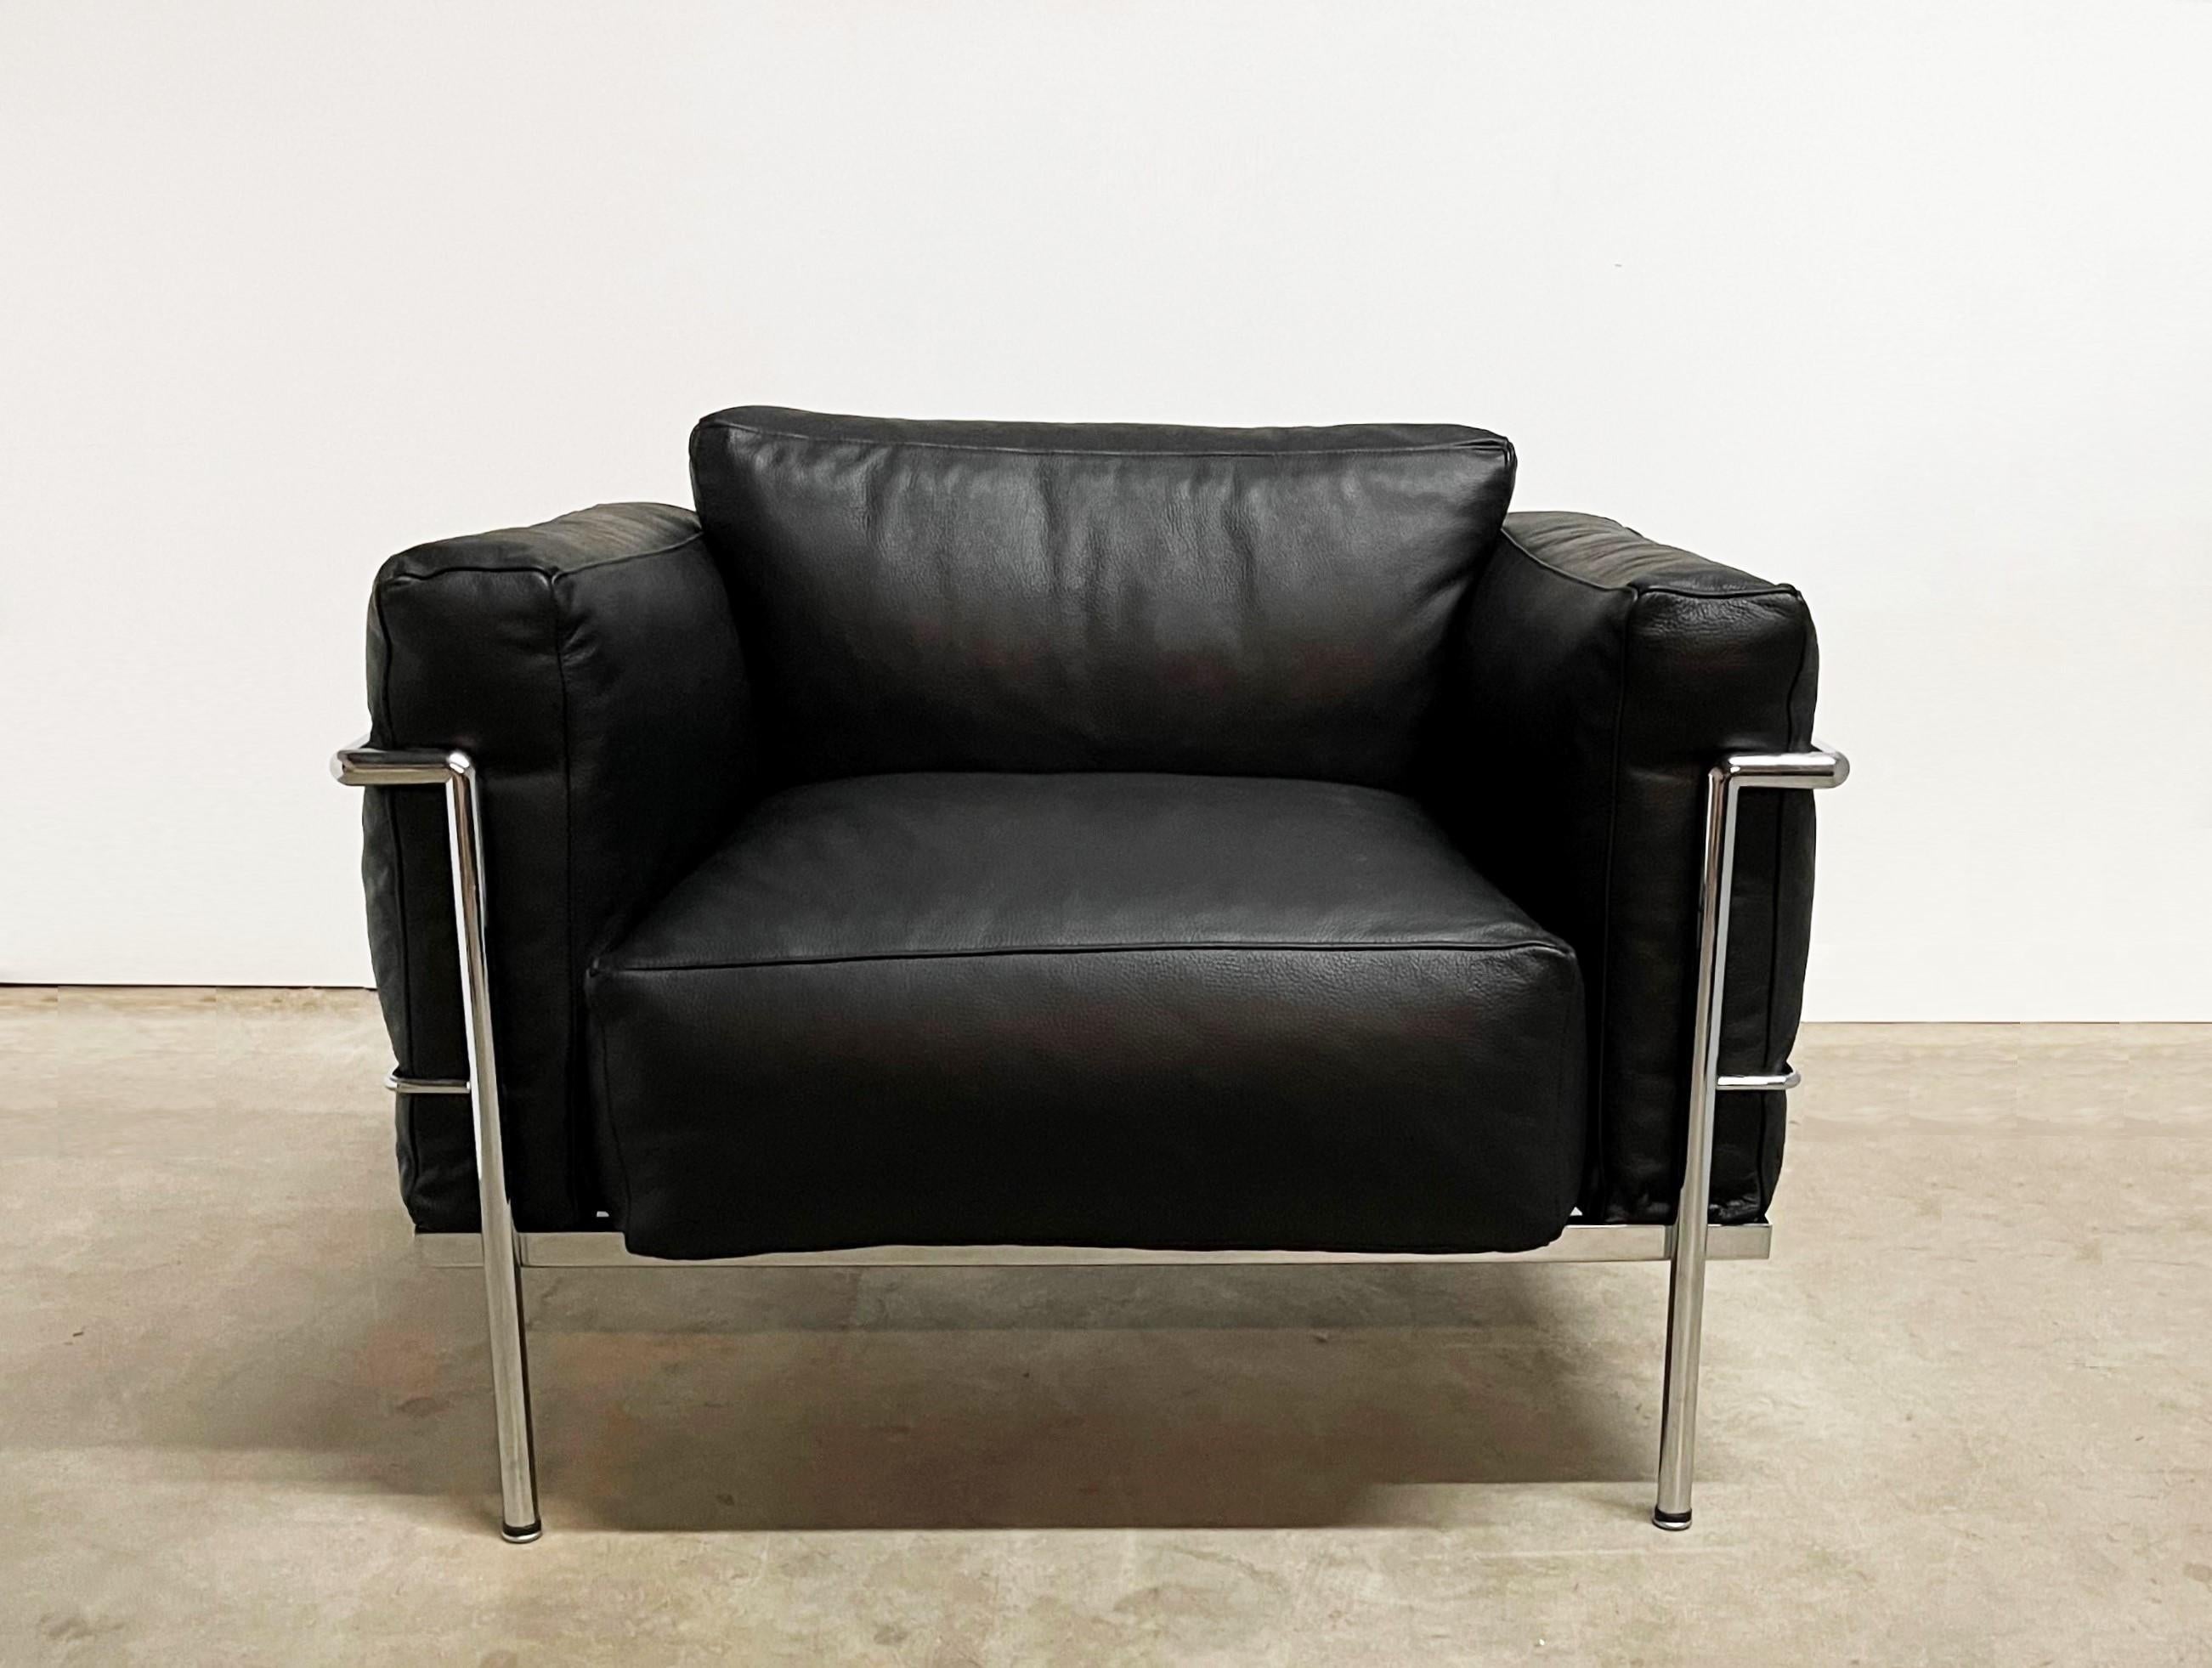 Pierre Jeanneret, Charlotte Perriand & Le Corbusier Grand Comfort Loungesessel (Bauhaus) im Angebot